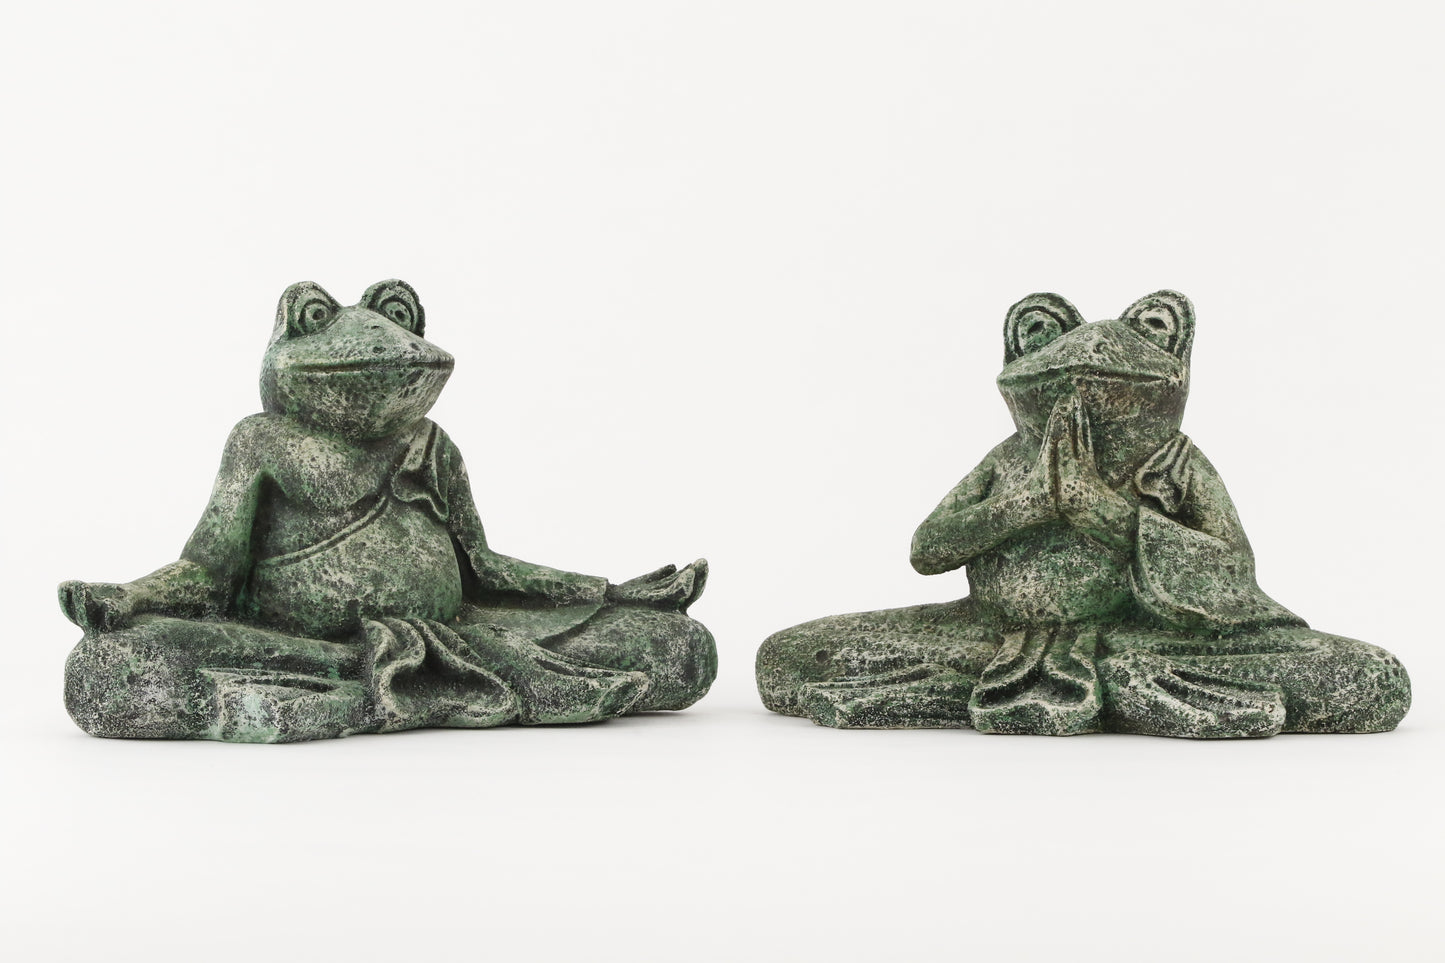 MEDITATING NAMASTE FROG STATUE COMPARISON FRONT VIEW